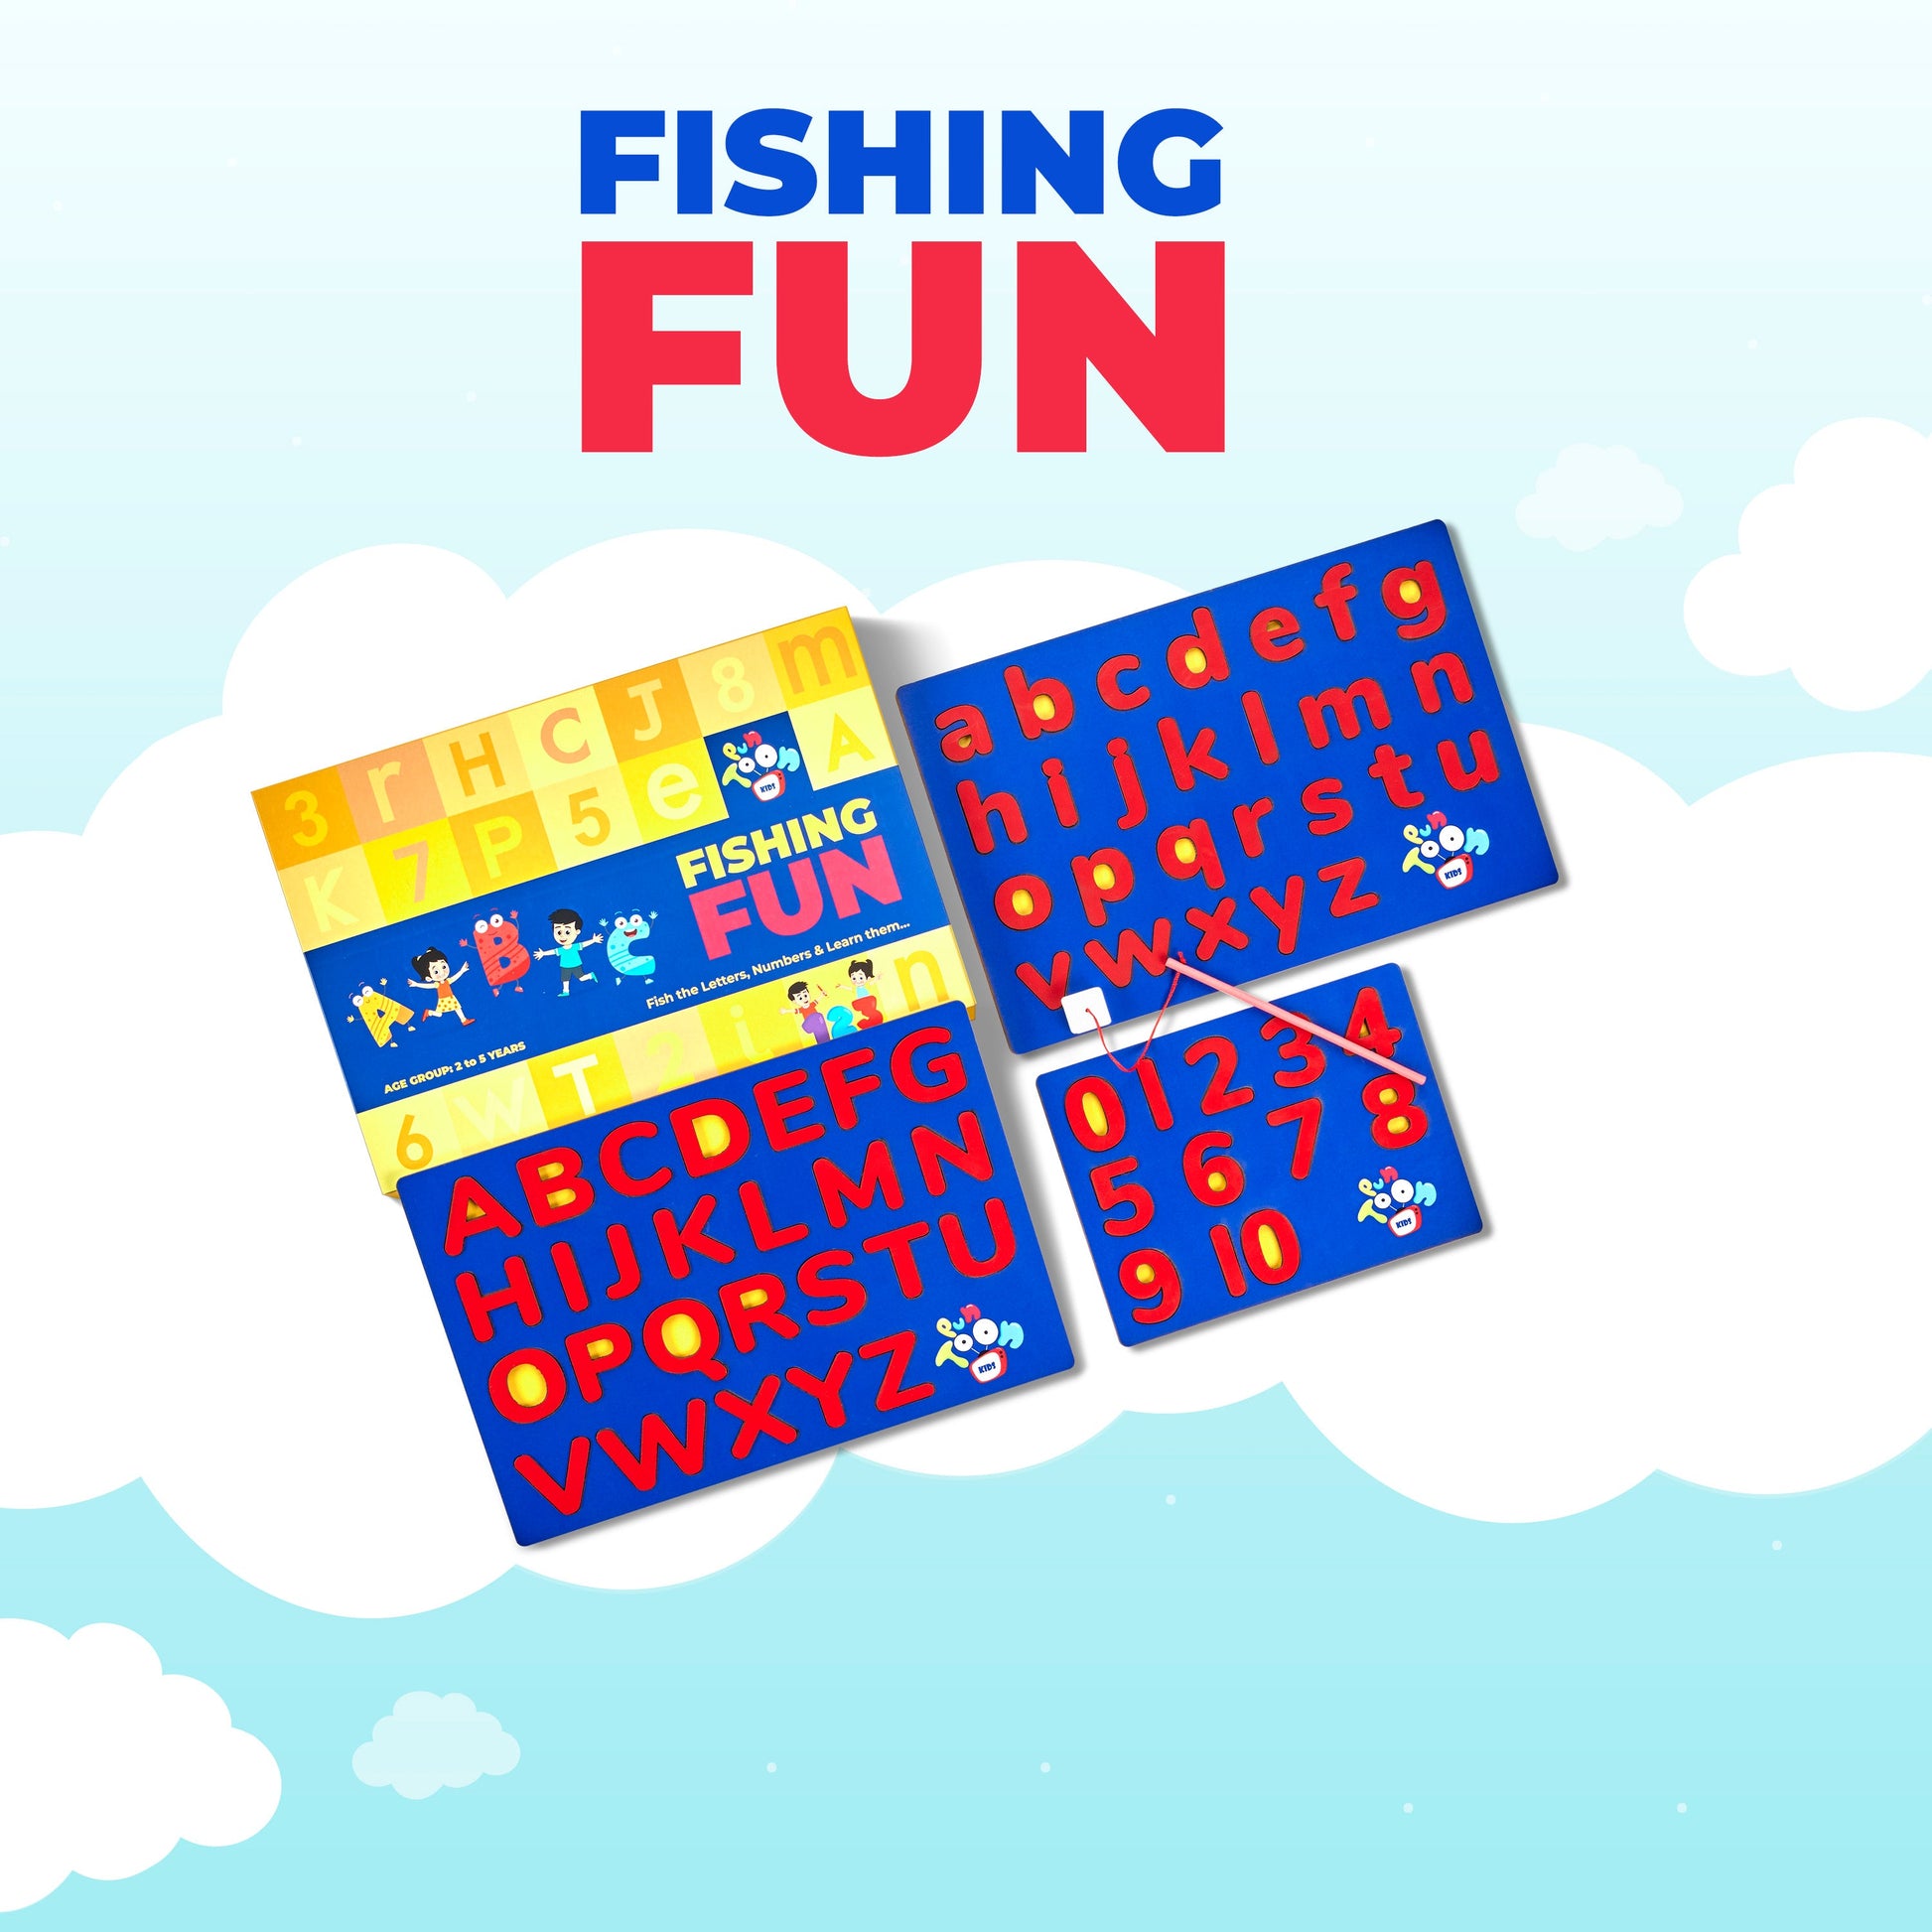 Fishing Fun Puzzles game with a variety of learning options